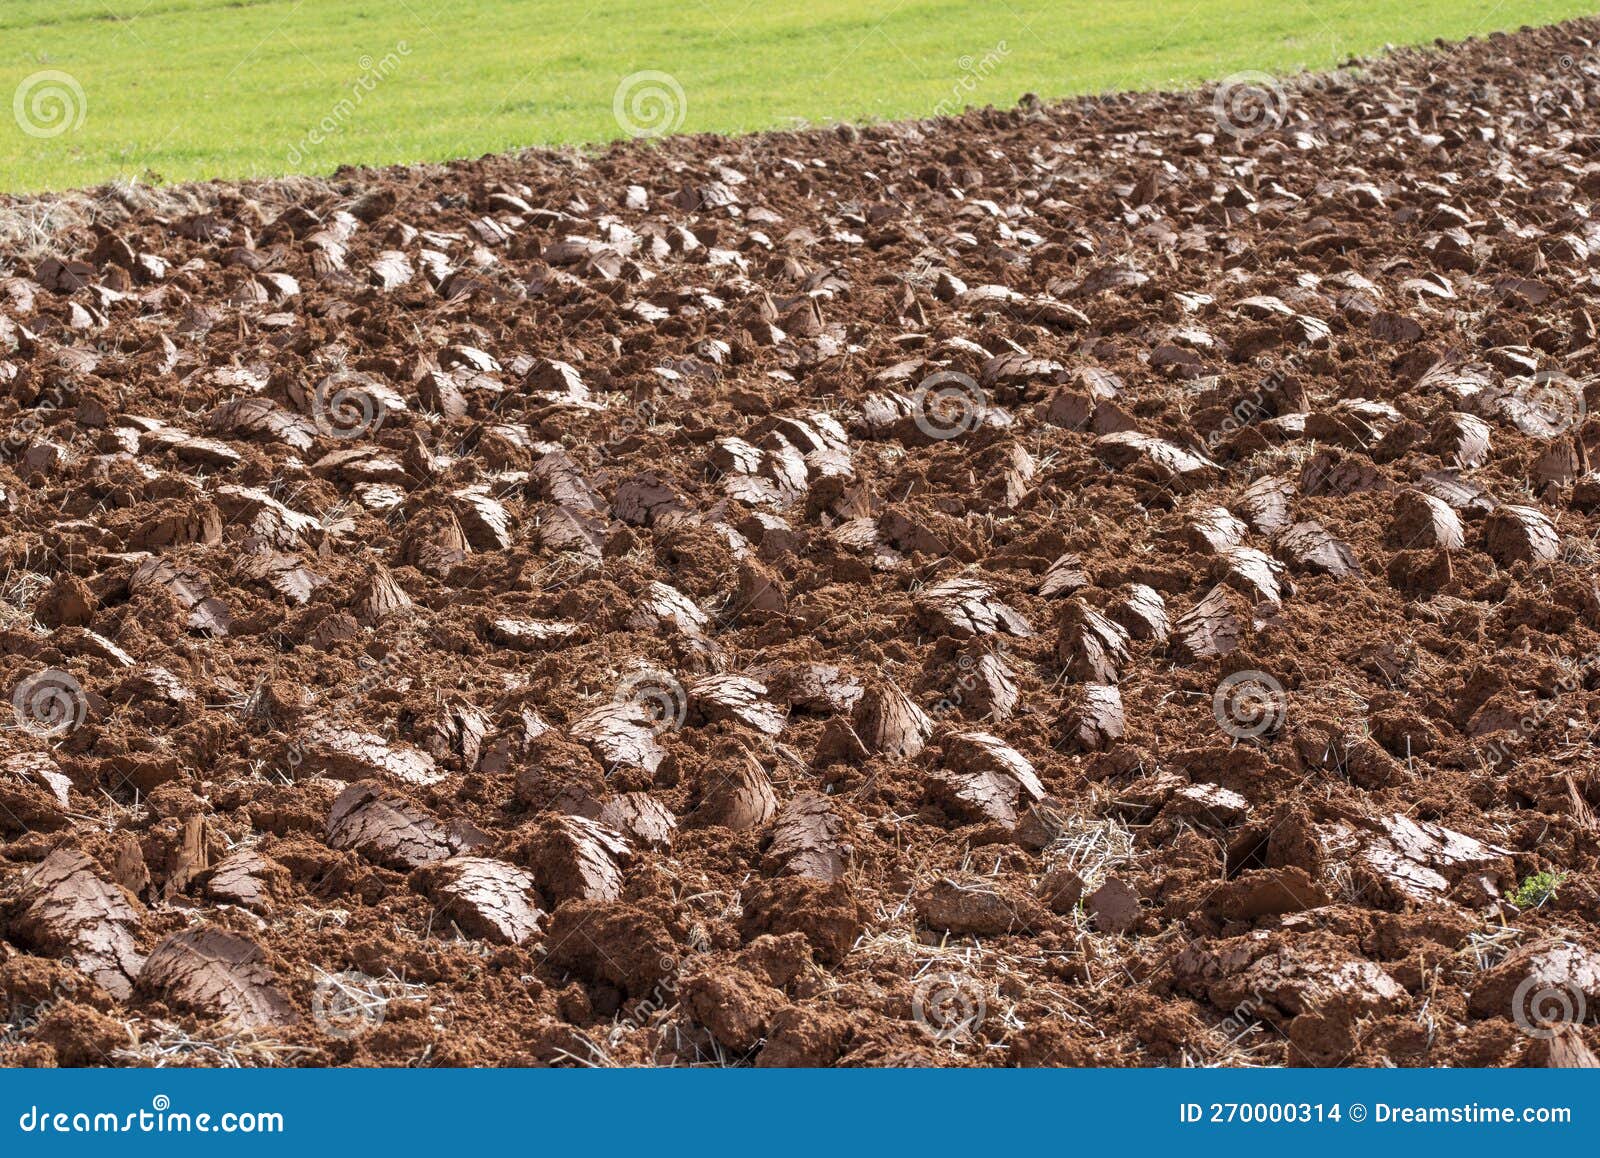 freshly tilled red farmland in the countryside